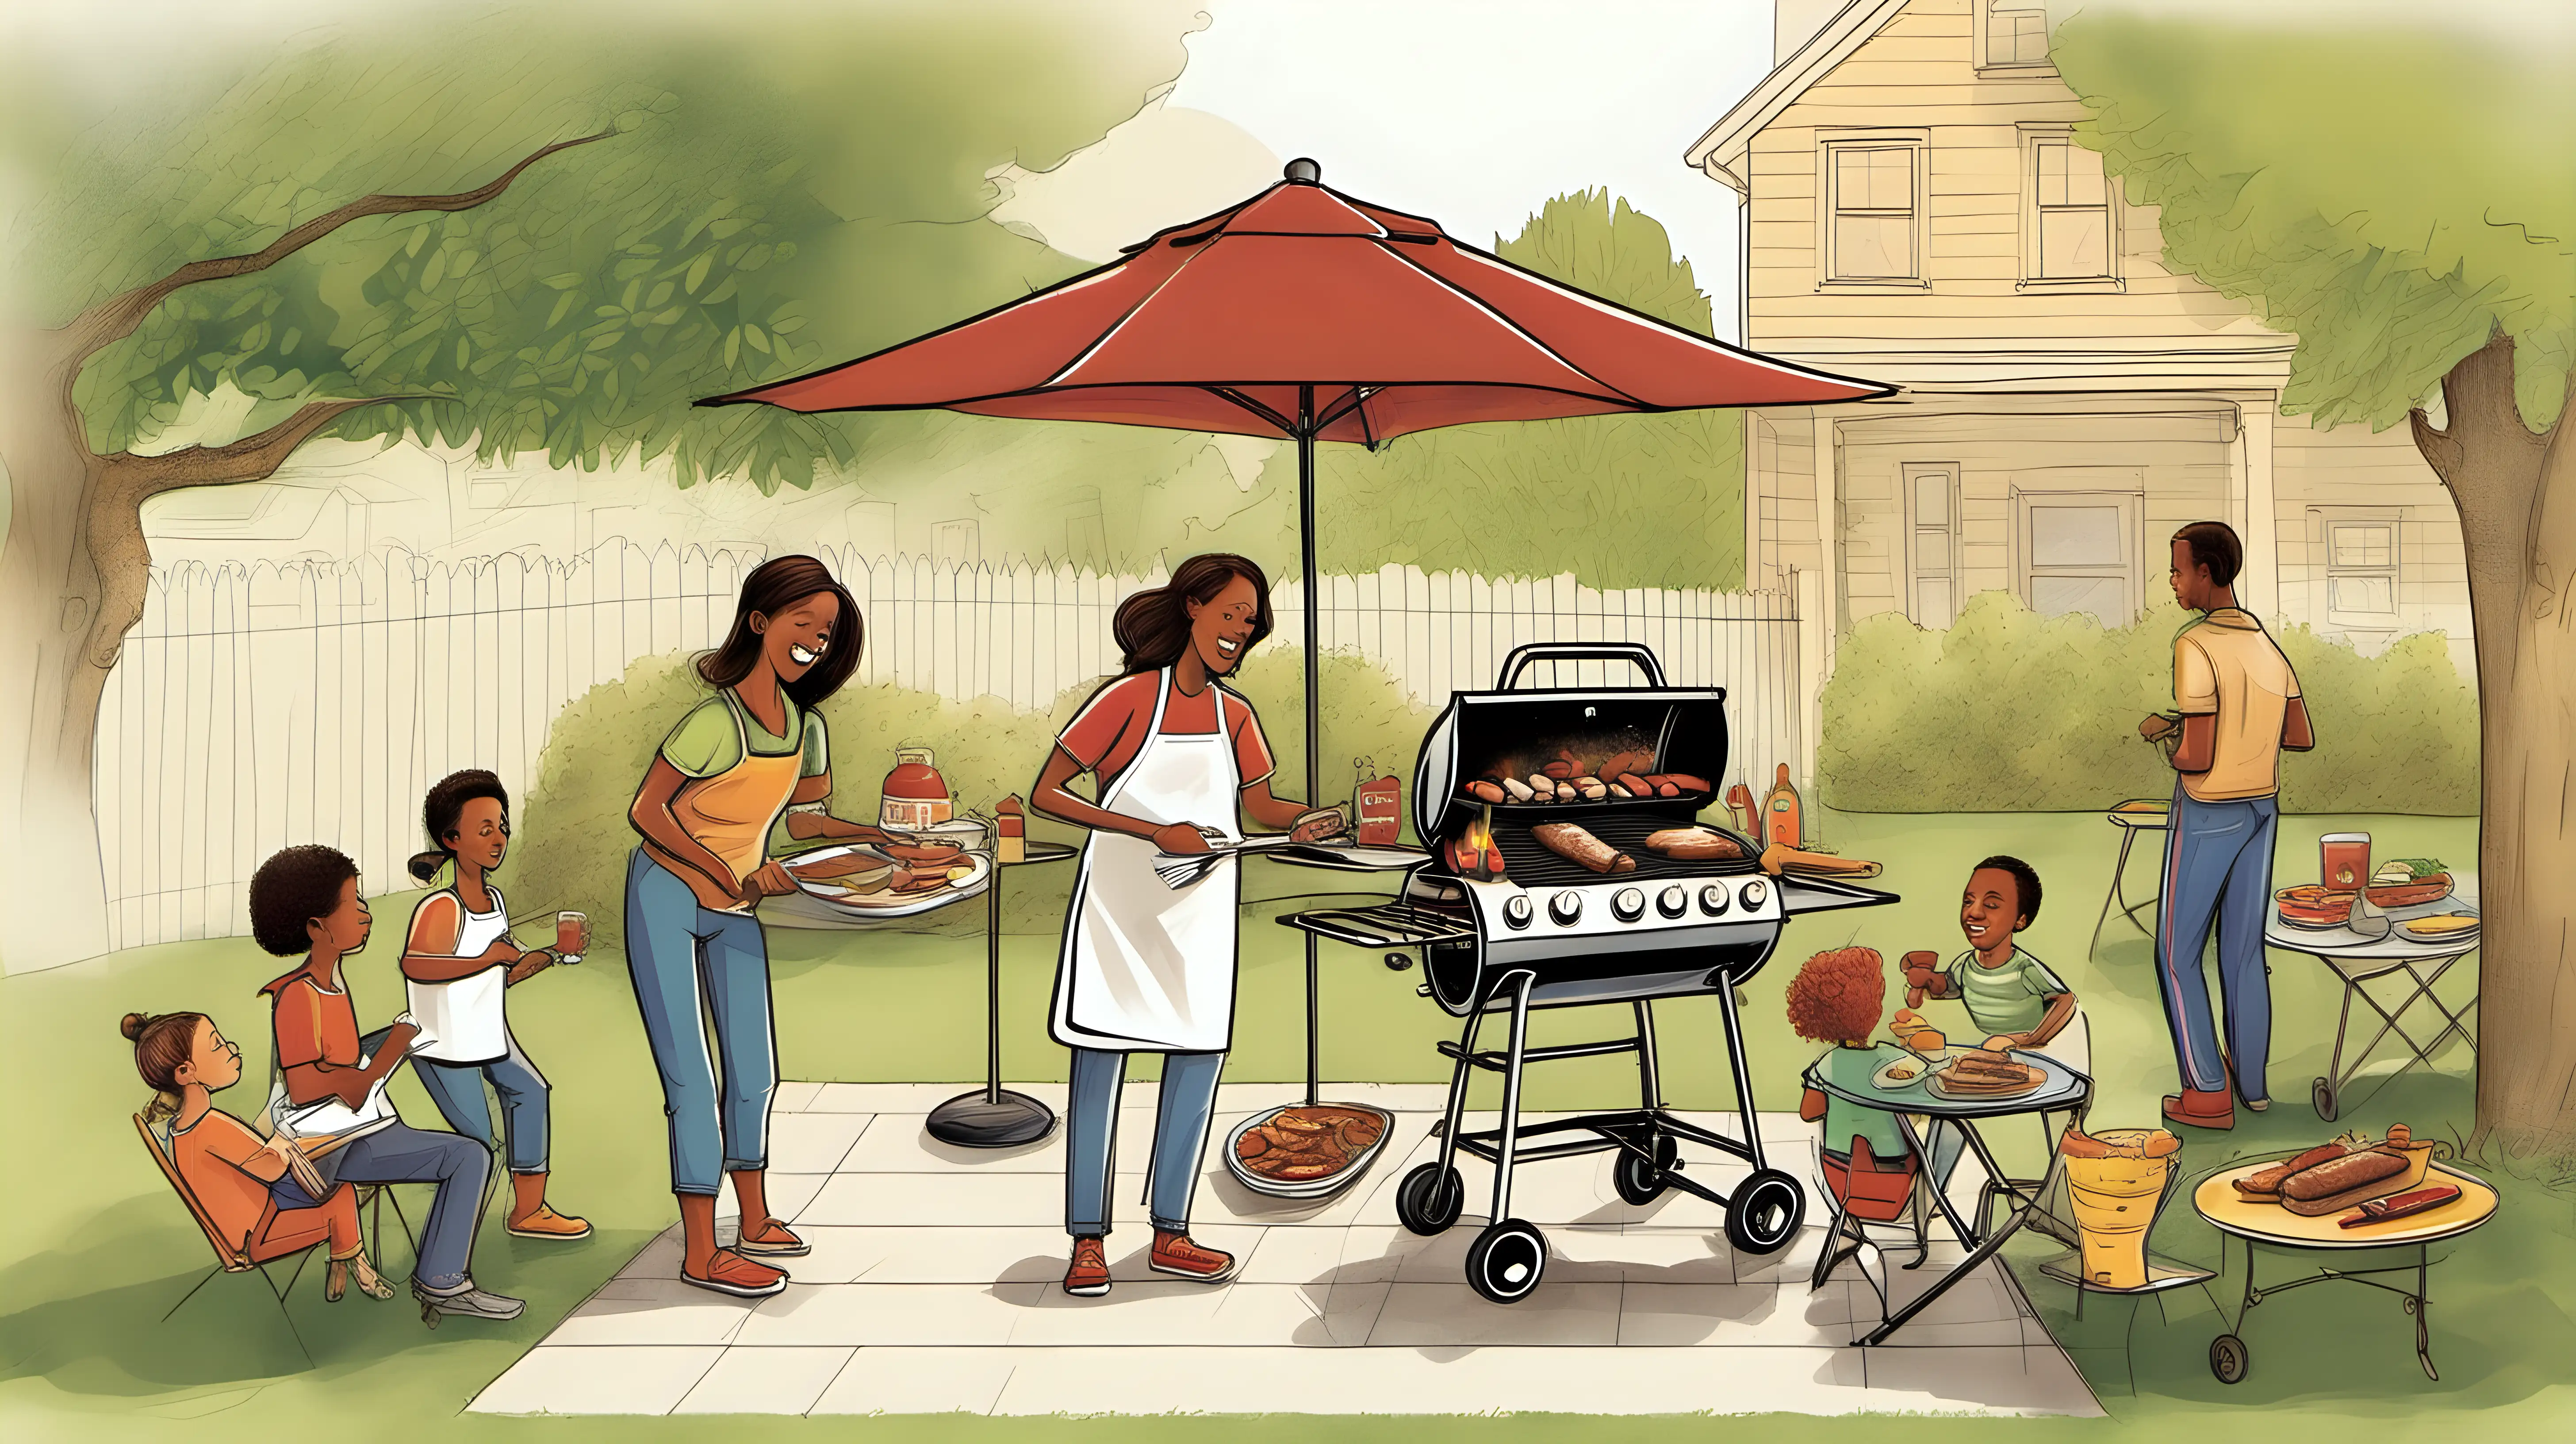 "Create an illustration of a backyard barbecue, with families grilling and enjoying classic American dishes in celebration of the holiday."